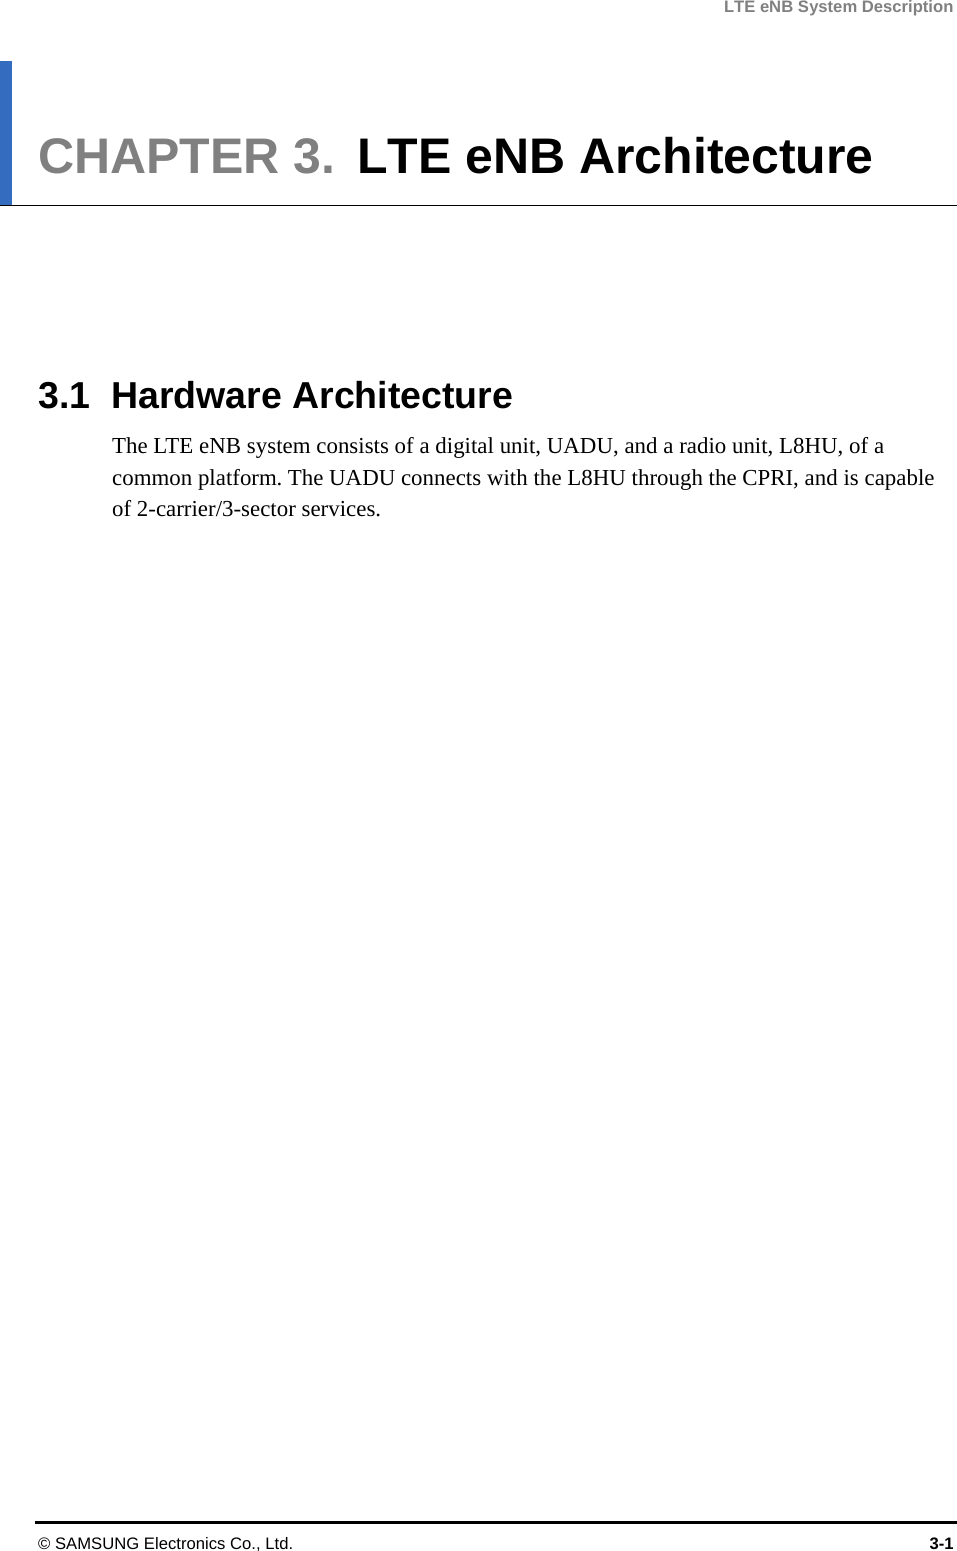 LTE eNB System Description CHAPTER 3.  LTE eNB Architecture      3.1 Hardware Architecture The LTE eNB system consists of a digital unit, UADU, and a radio unit, L8HU, of a common platform. The UADU connects with the L8HU through the CPRI, and is capable of 2-carrier/3-sector services.  © SAMSUNG Electronics Co., Ltd.  3-1 